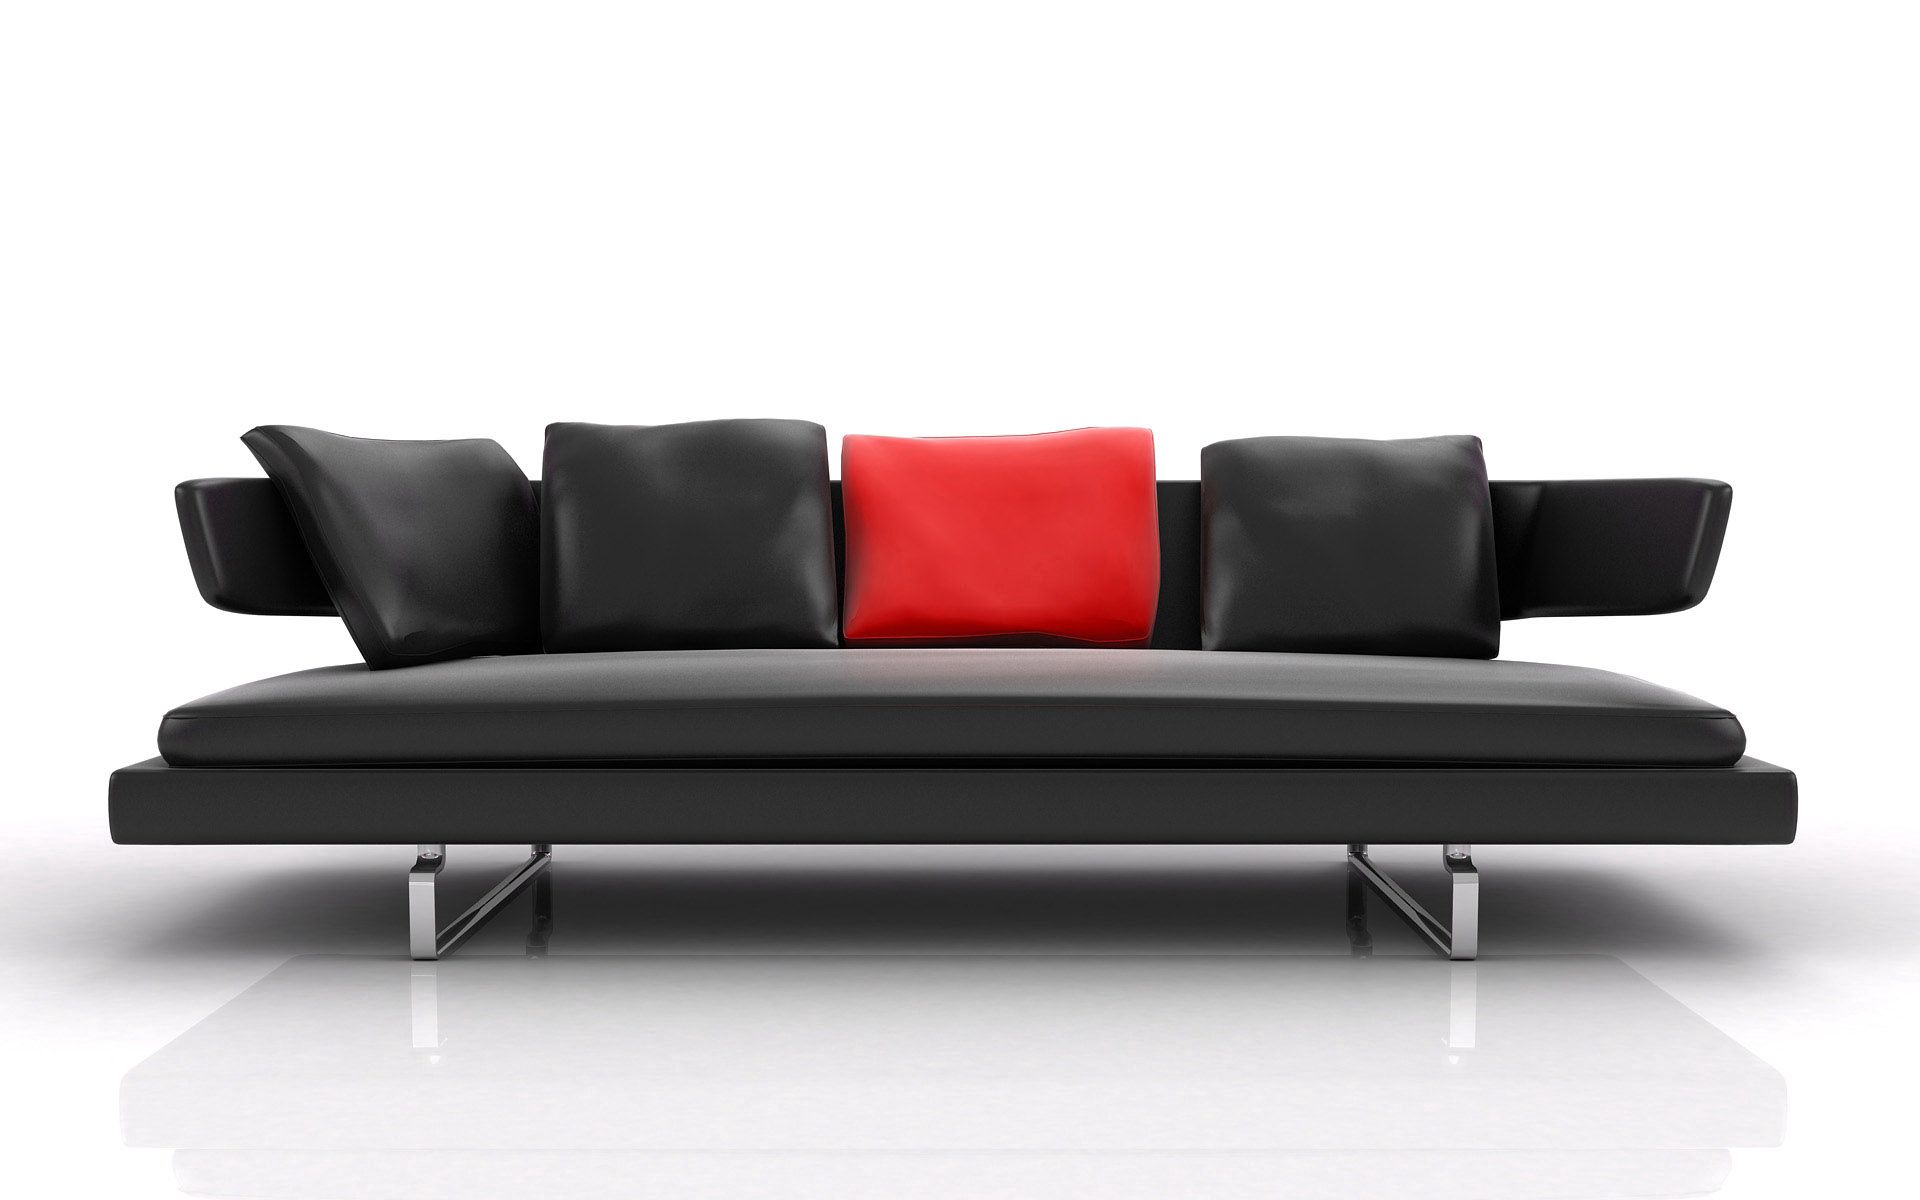 furniture, miscellanea, miscellaneous, style, sofa, modern, up to date, cushions, pillows Full HD